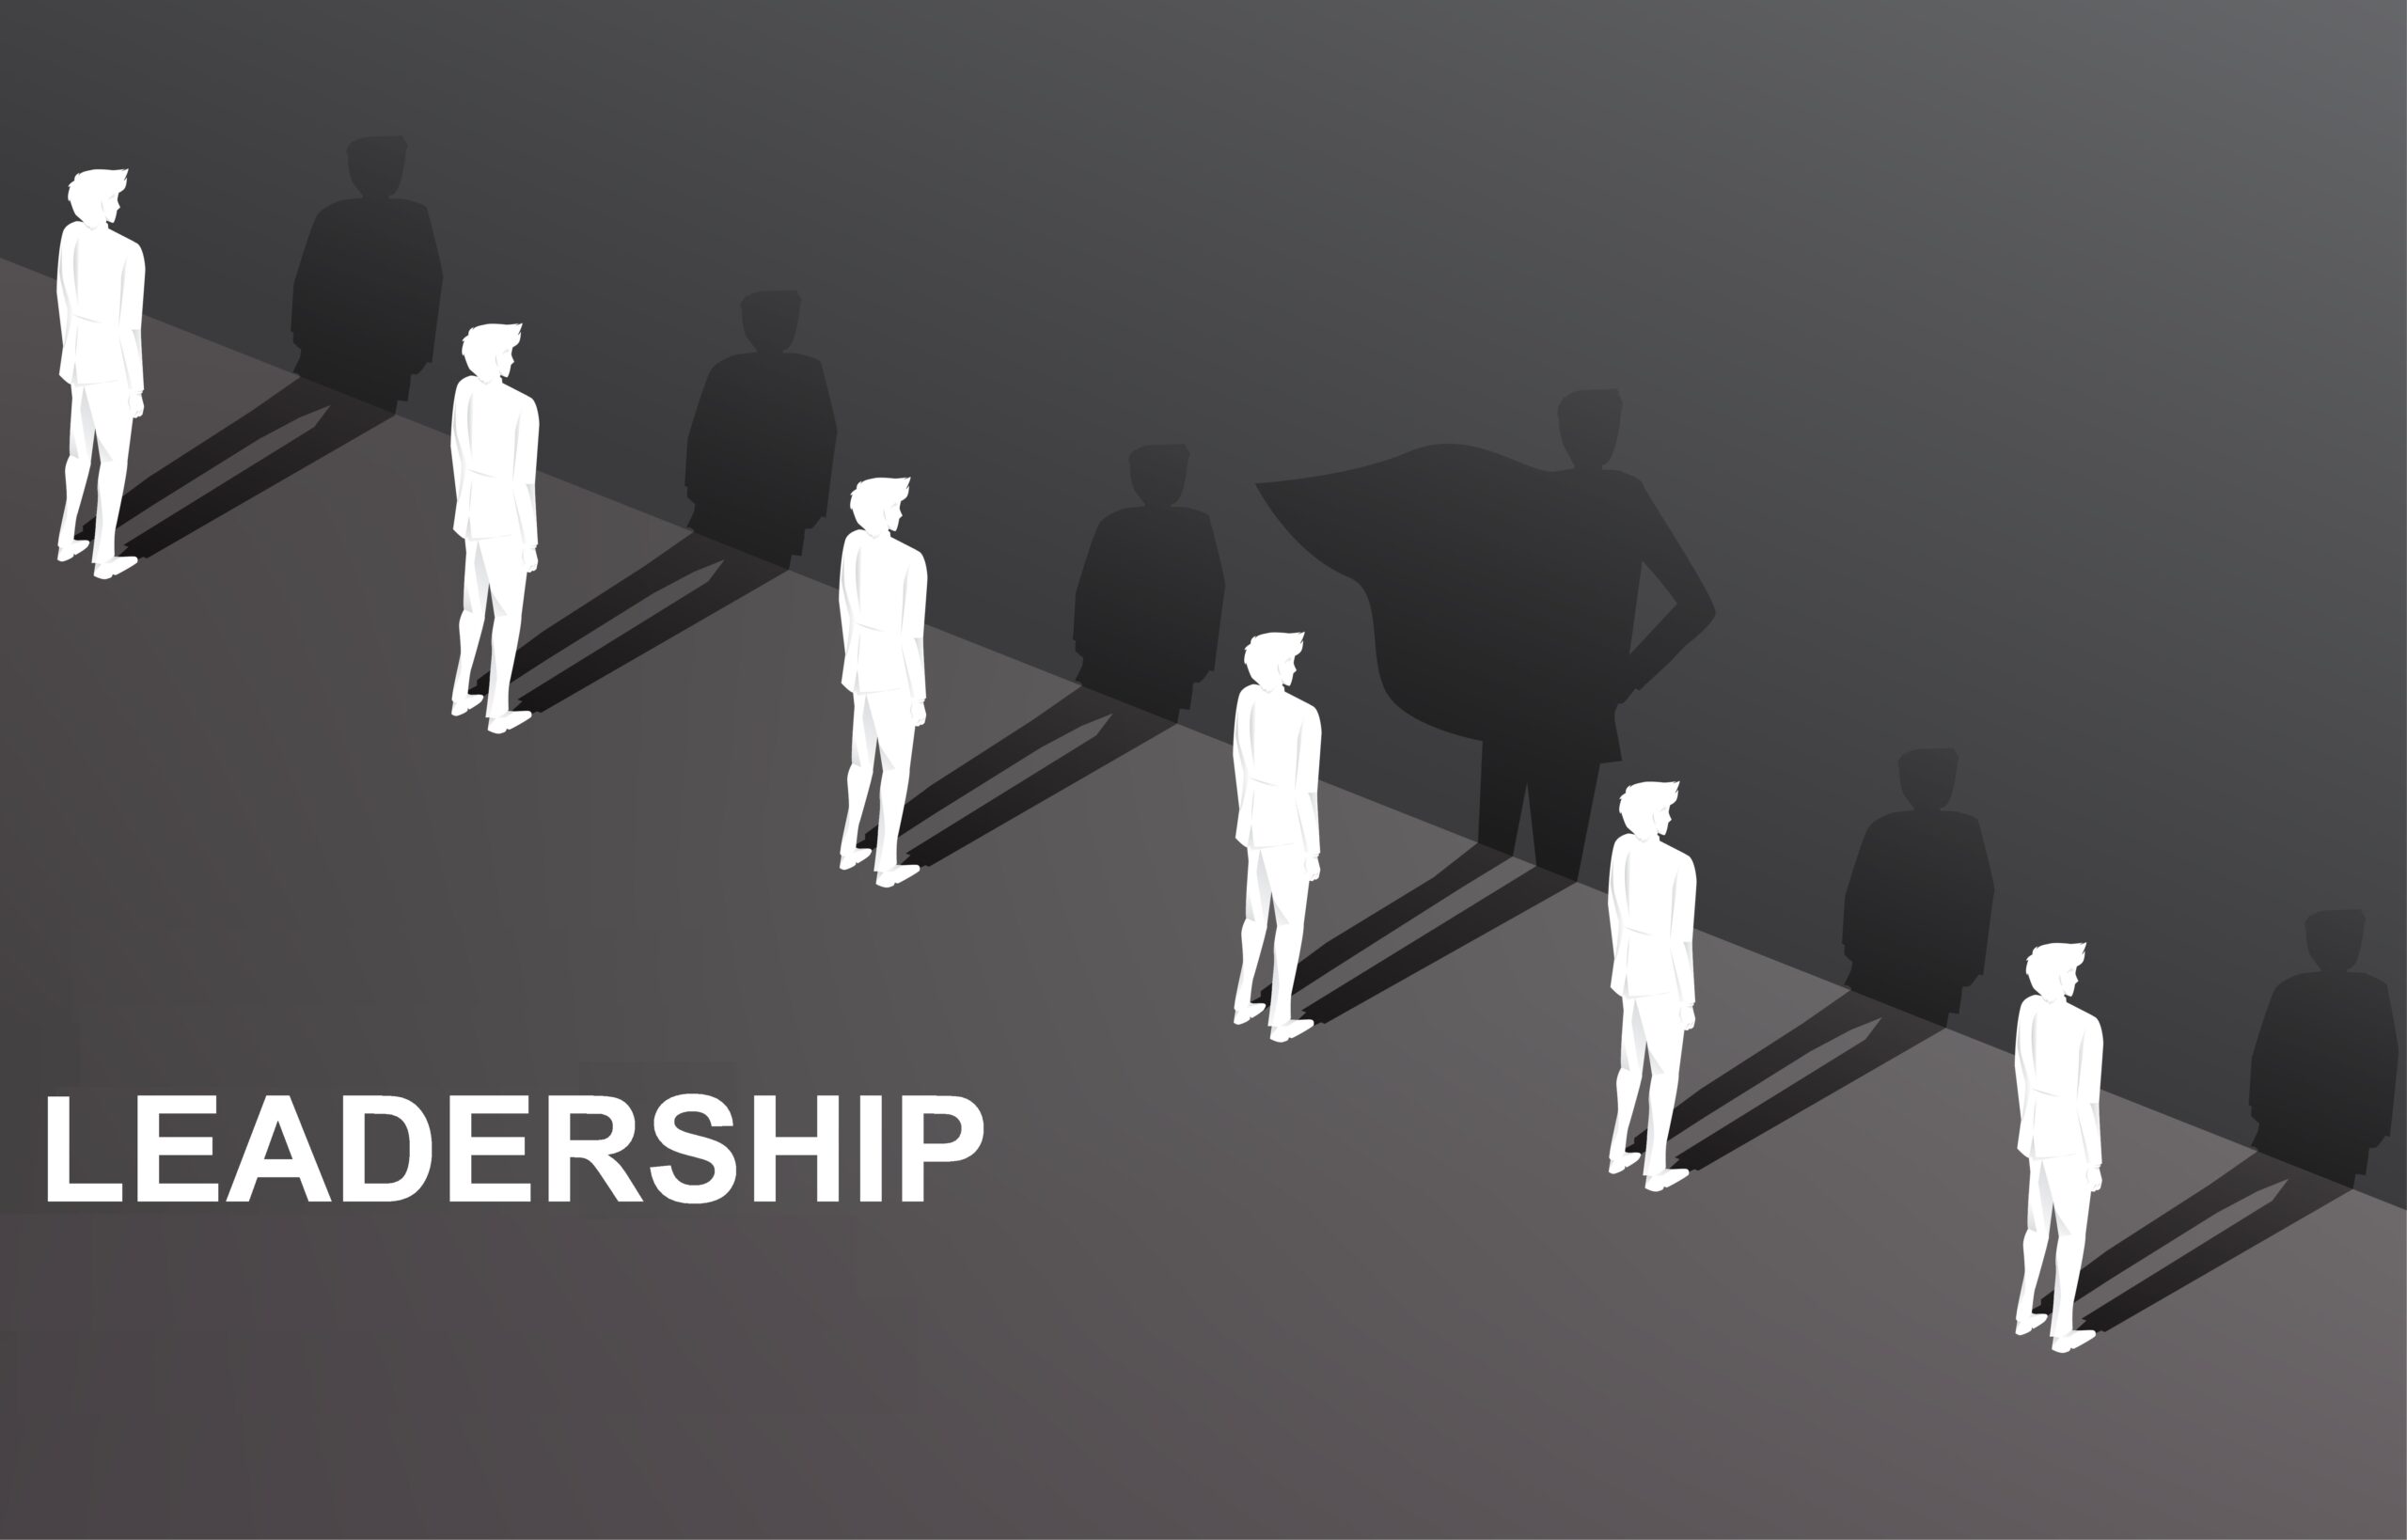 Is Leadership important in a start-up?